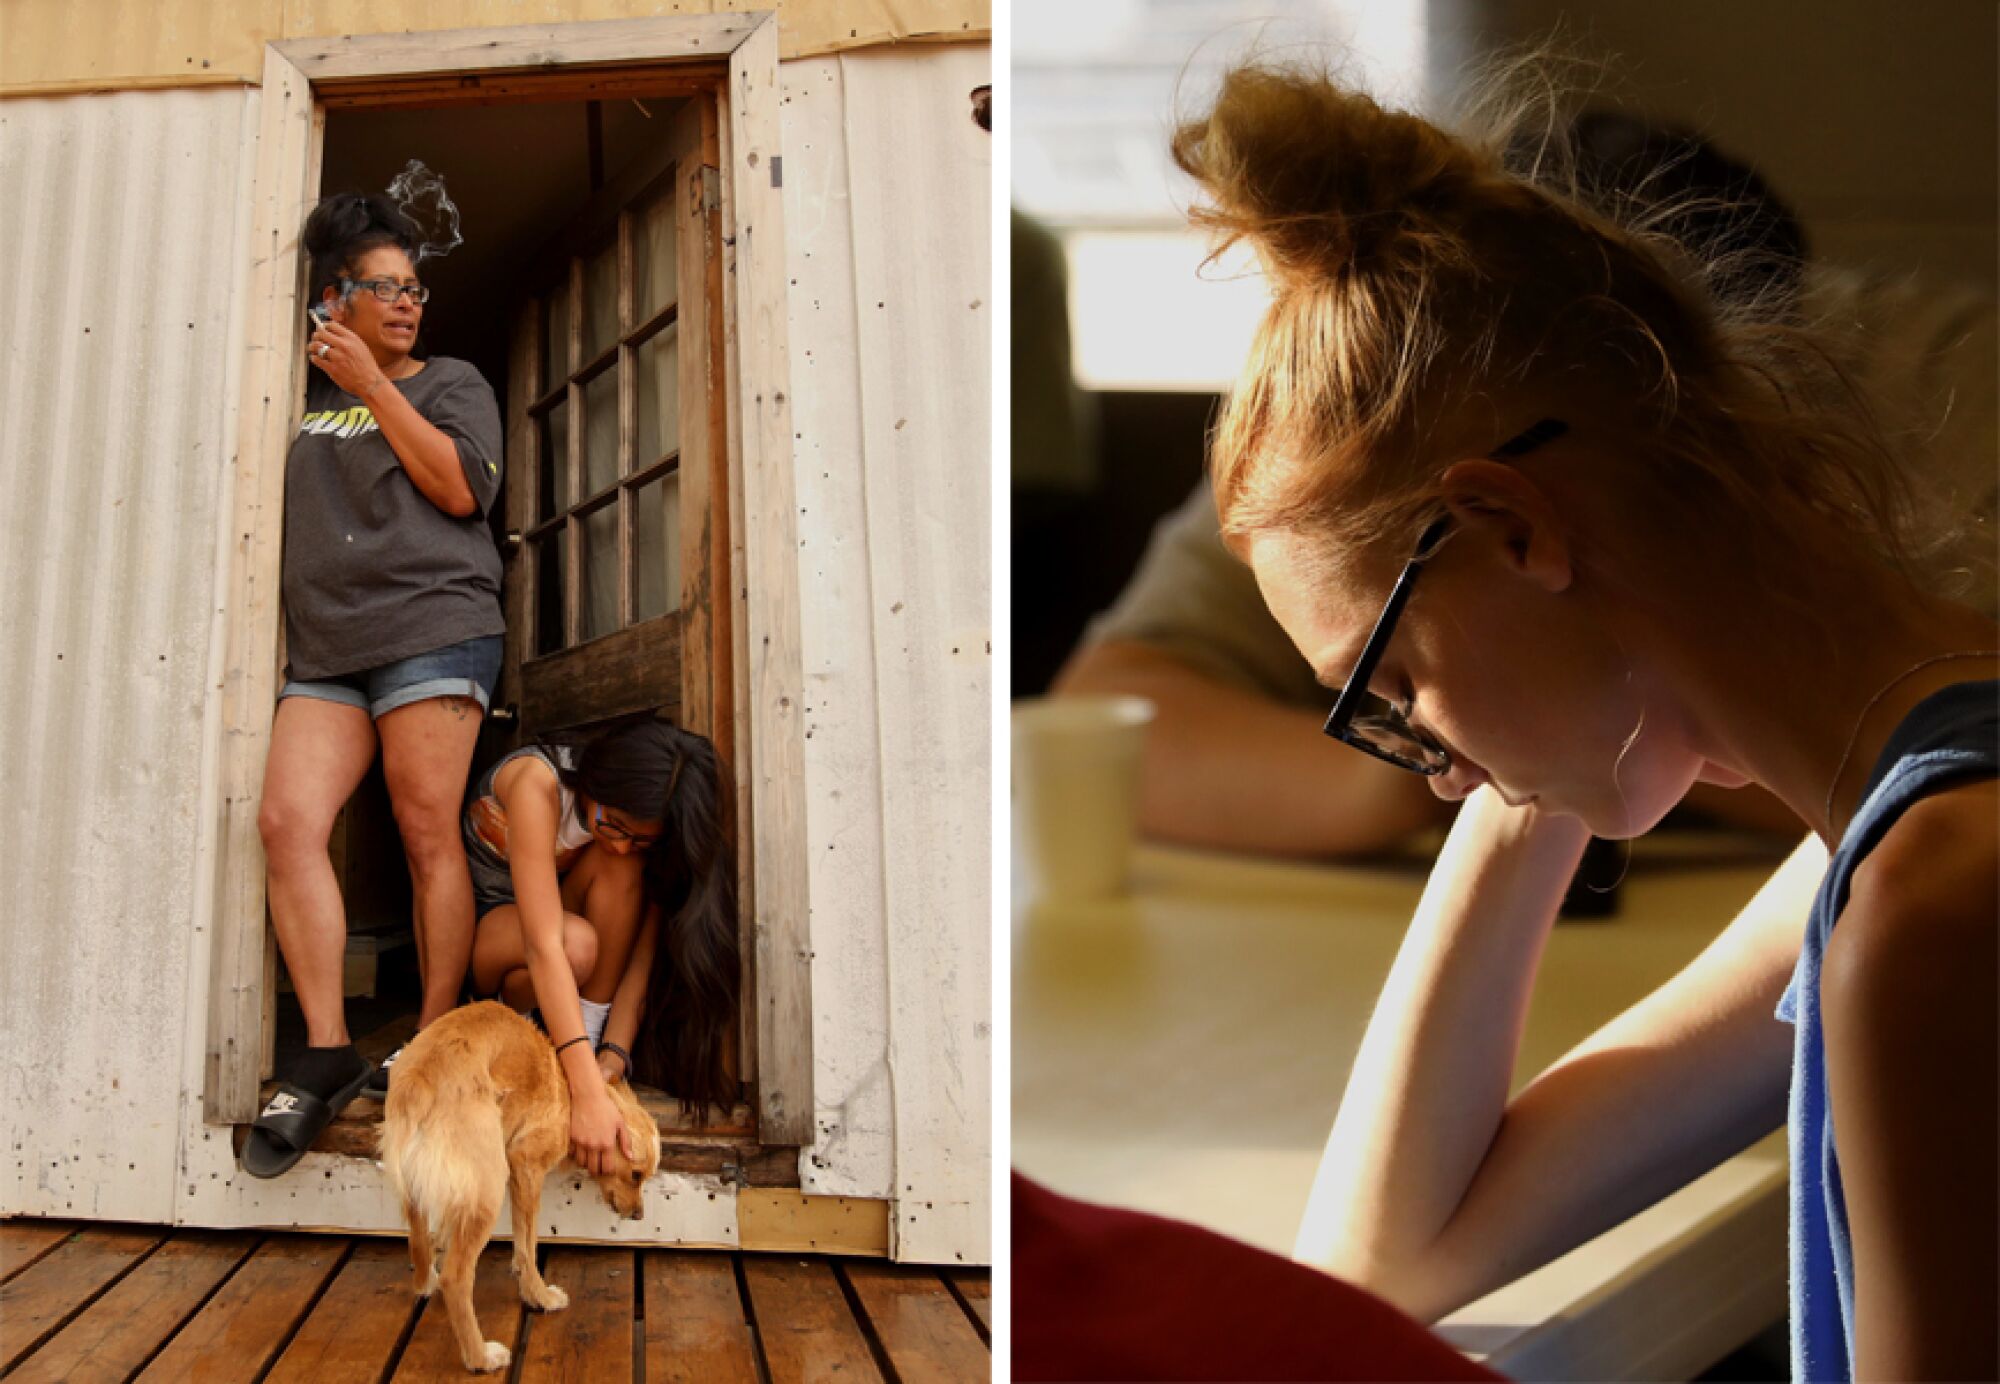 At left,  a woman smoking and a girl petting a dog; at right, a teen praying